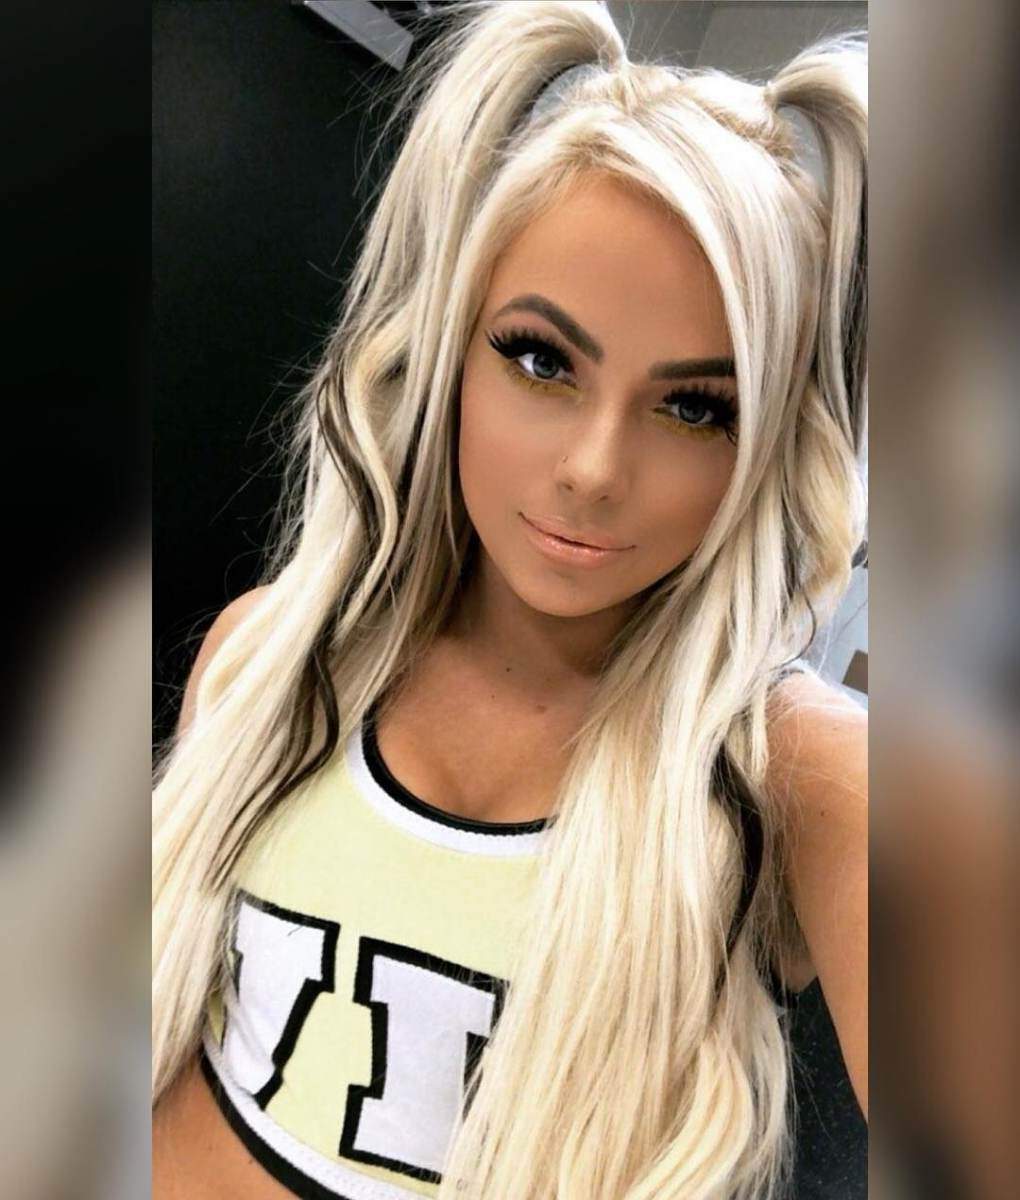 Former Model And Hooters Waitress Liv Morgan Has What It Takes To Be The Wwe S Next Superstar